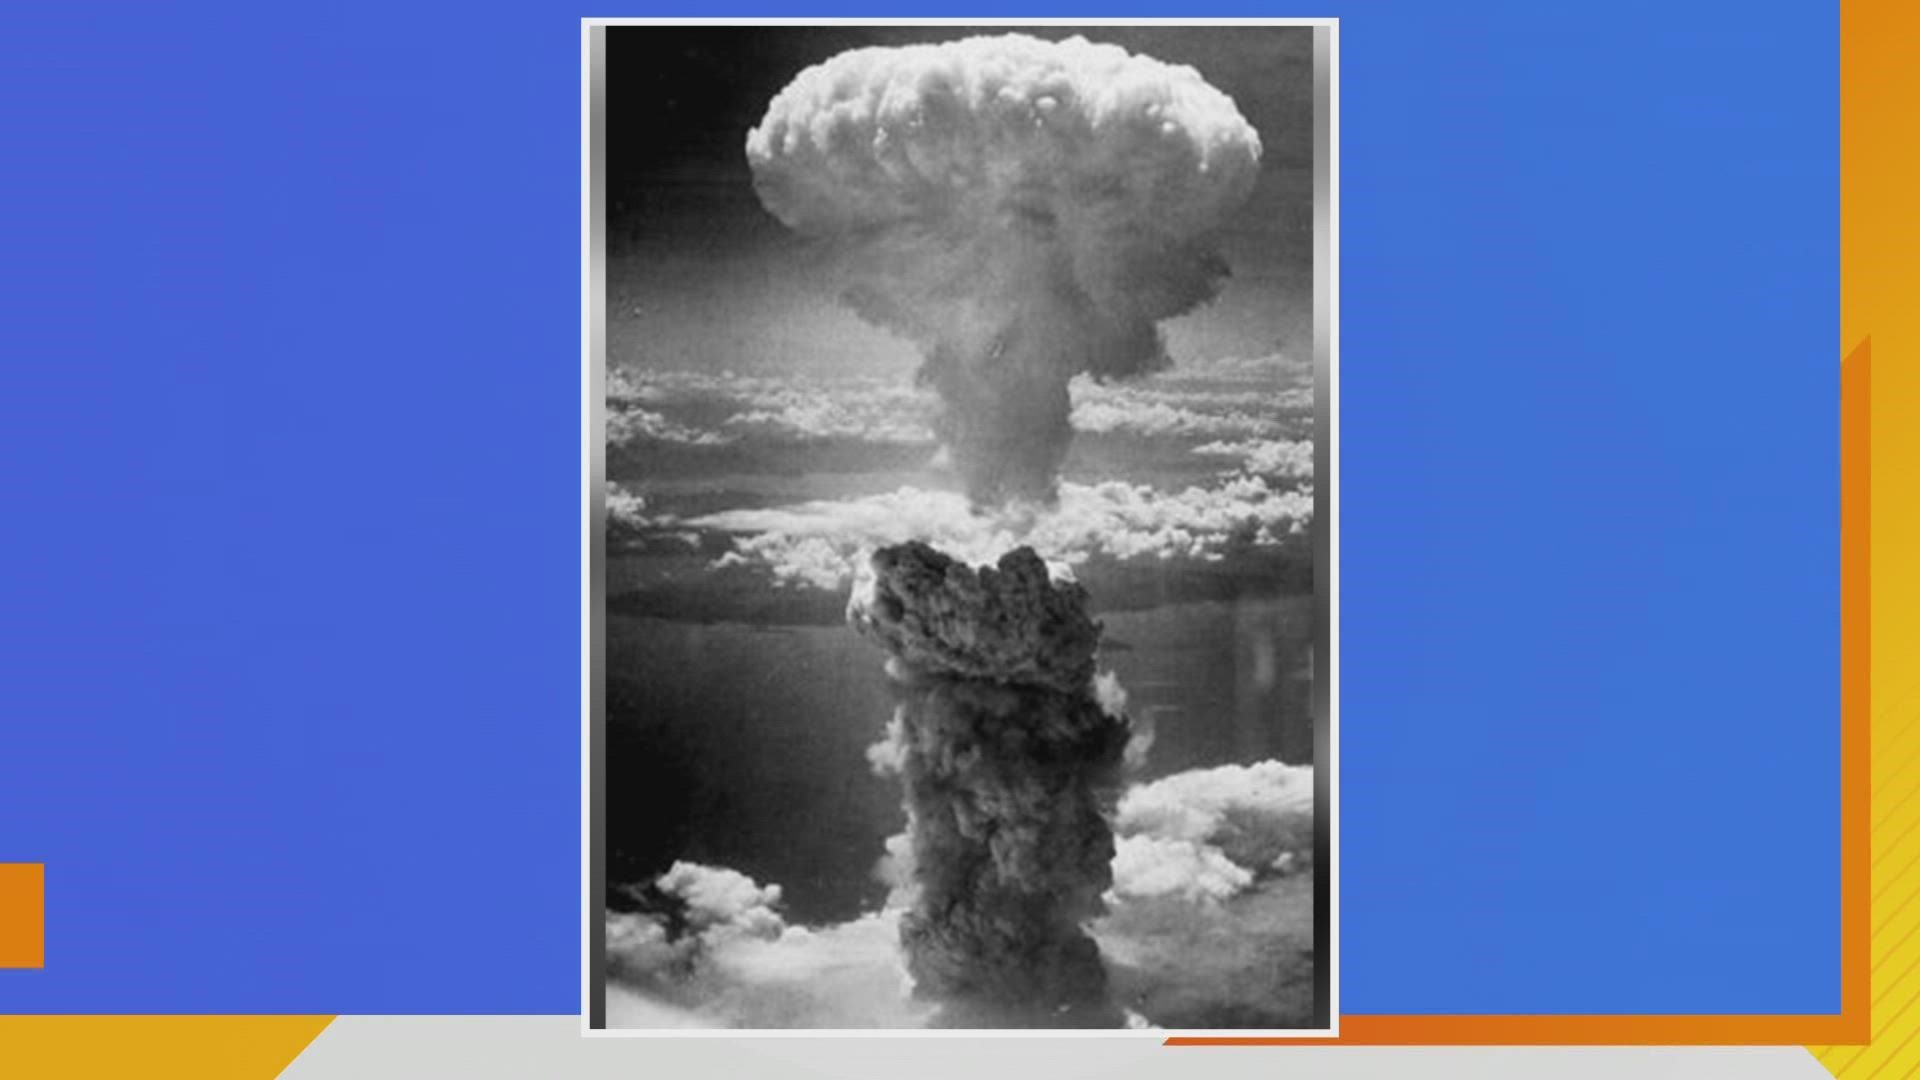 The Iowa Almanac has details on Iowa State University connection to the Manhattan Project resulting in the creation of the first Atomic Bomb